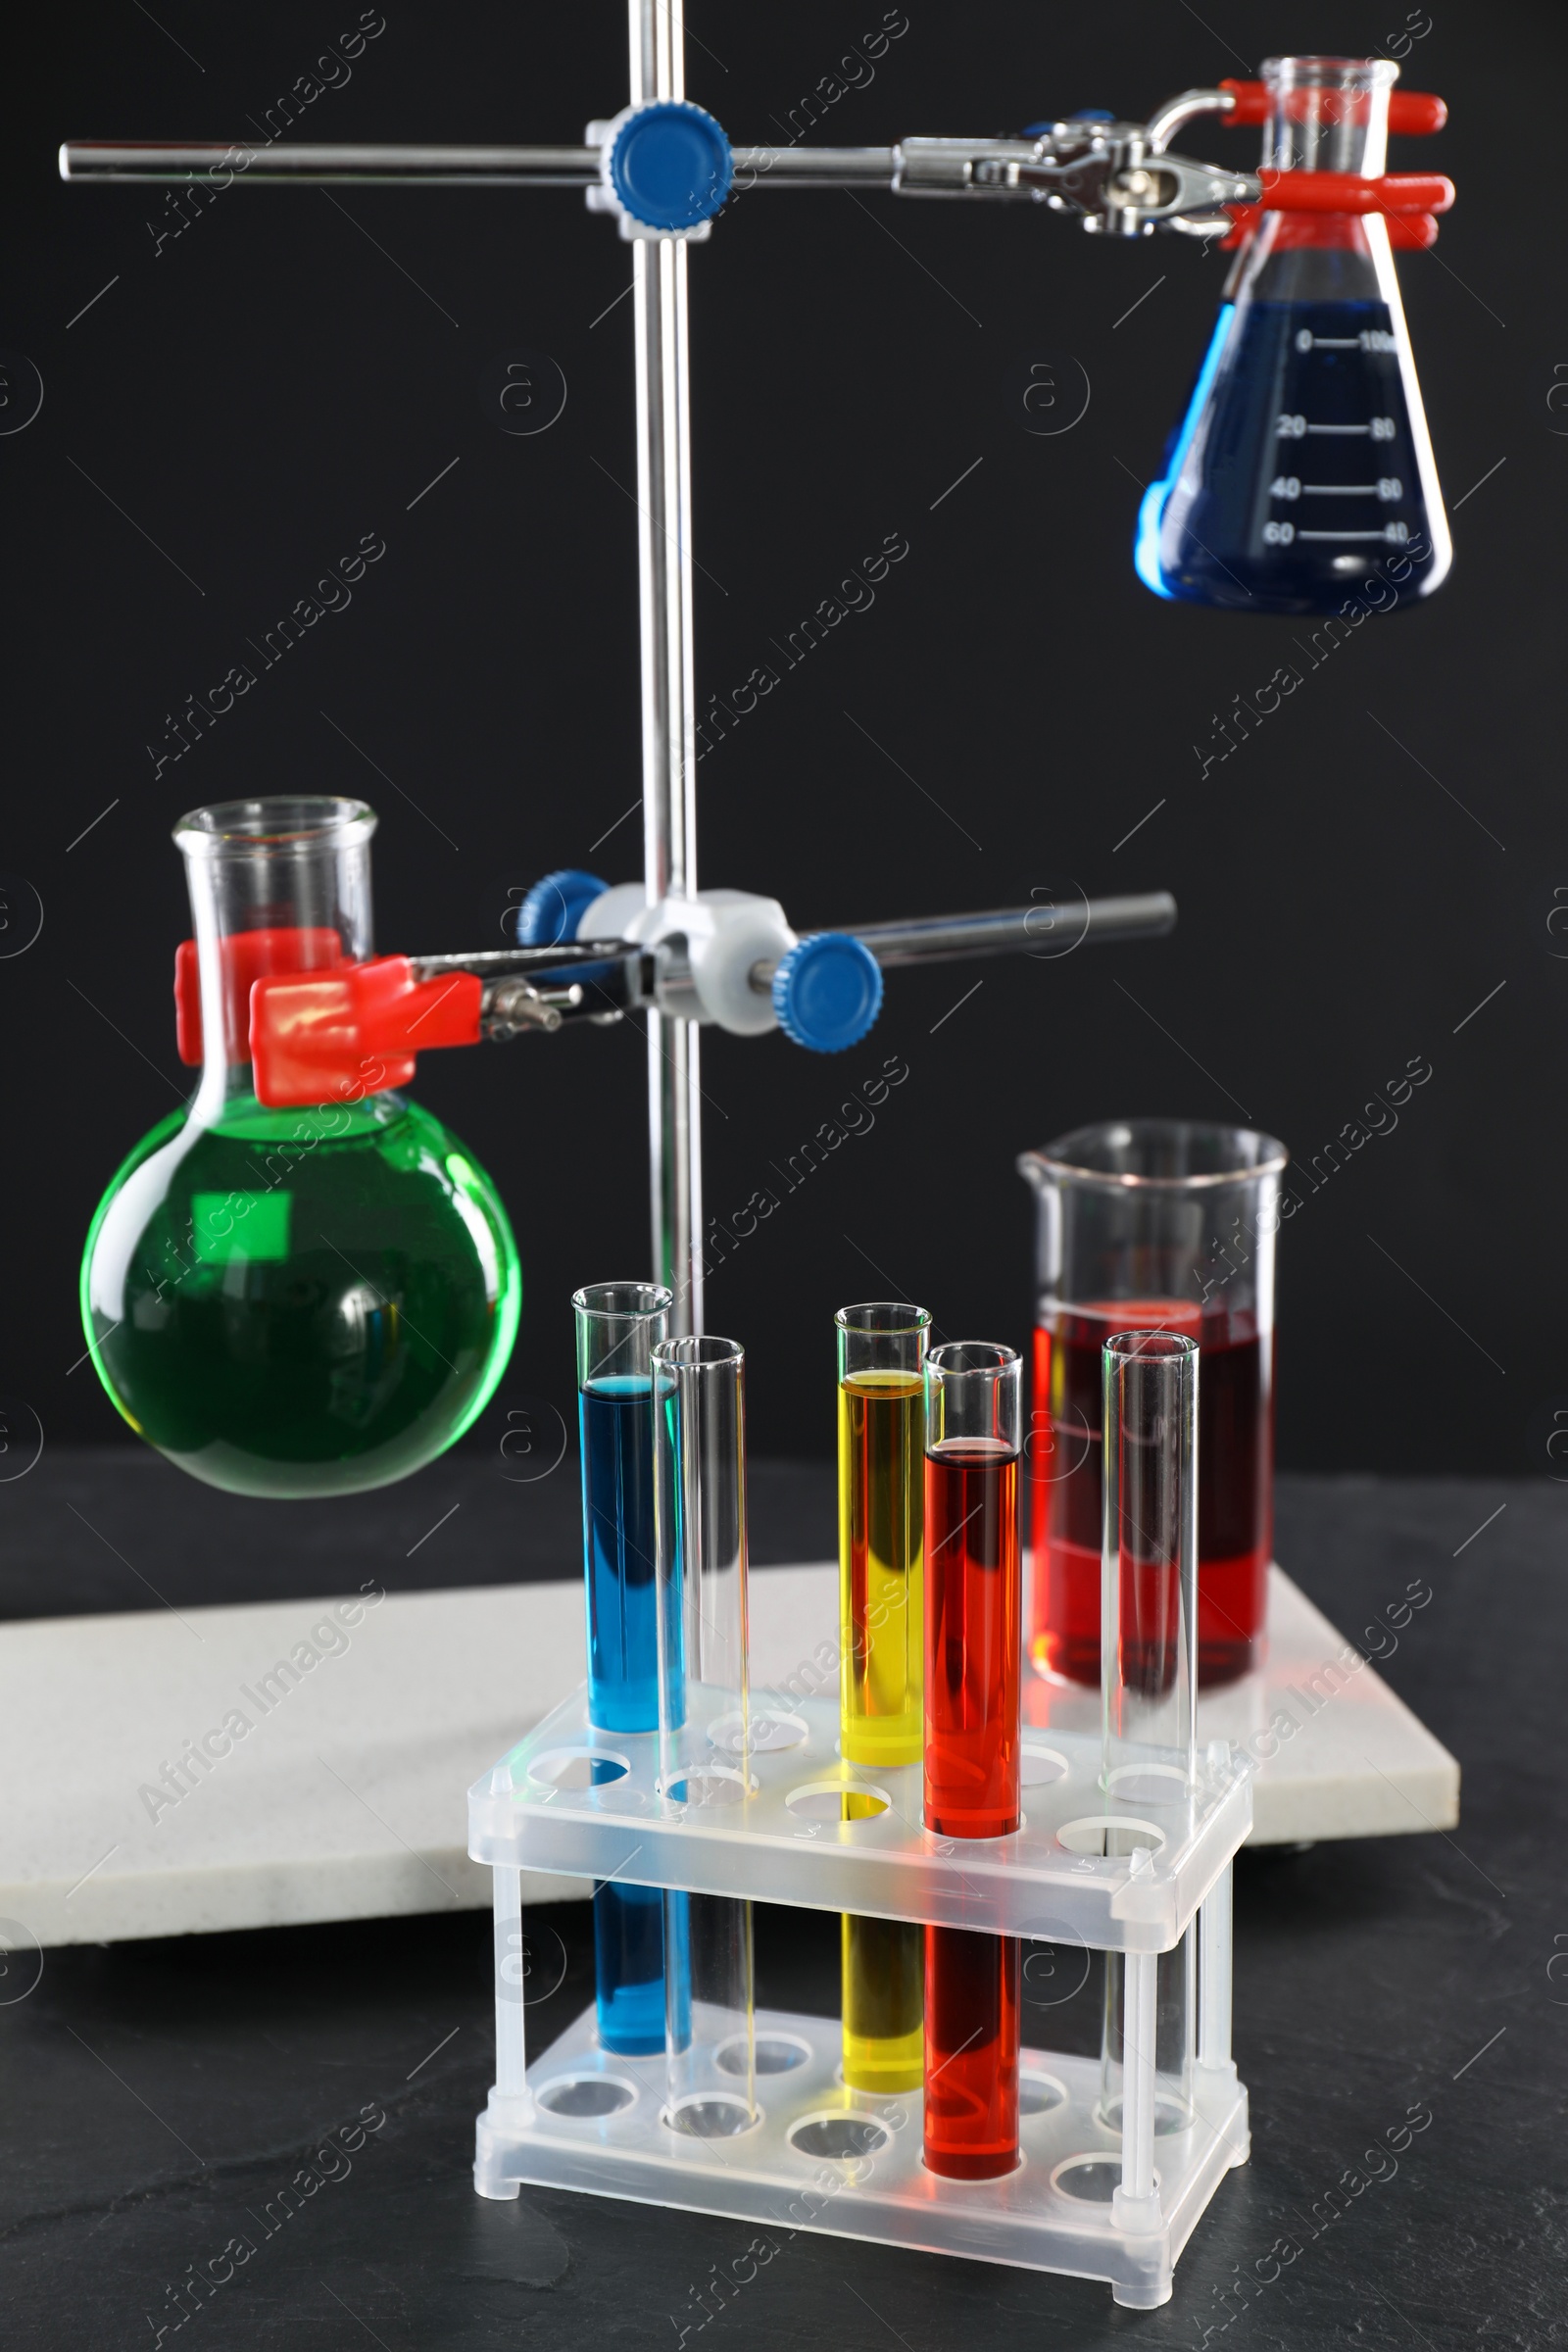 Photo of Laboratory glassware with liquids on table against black background